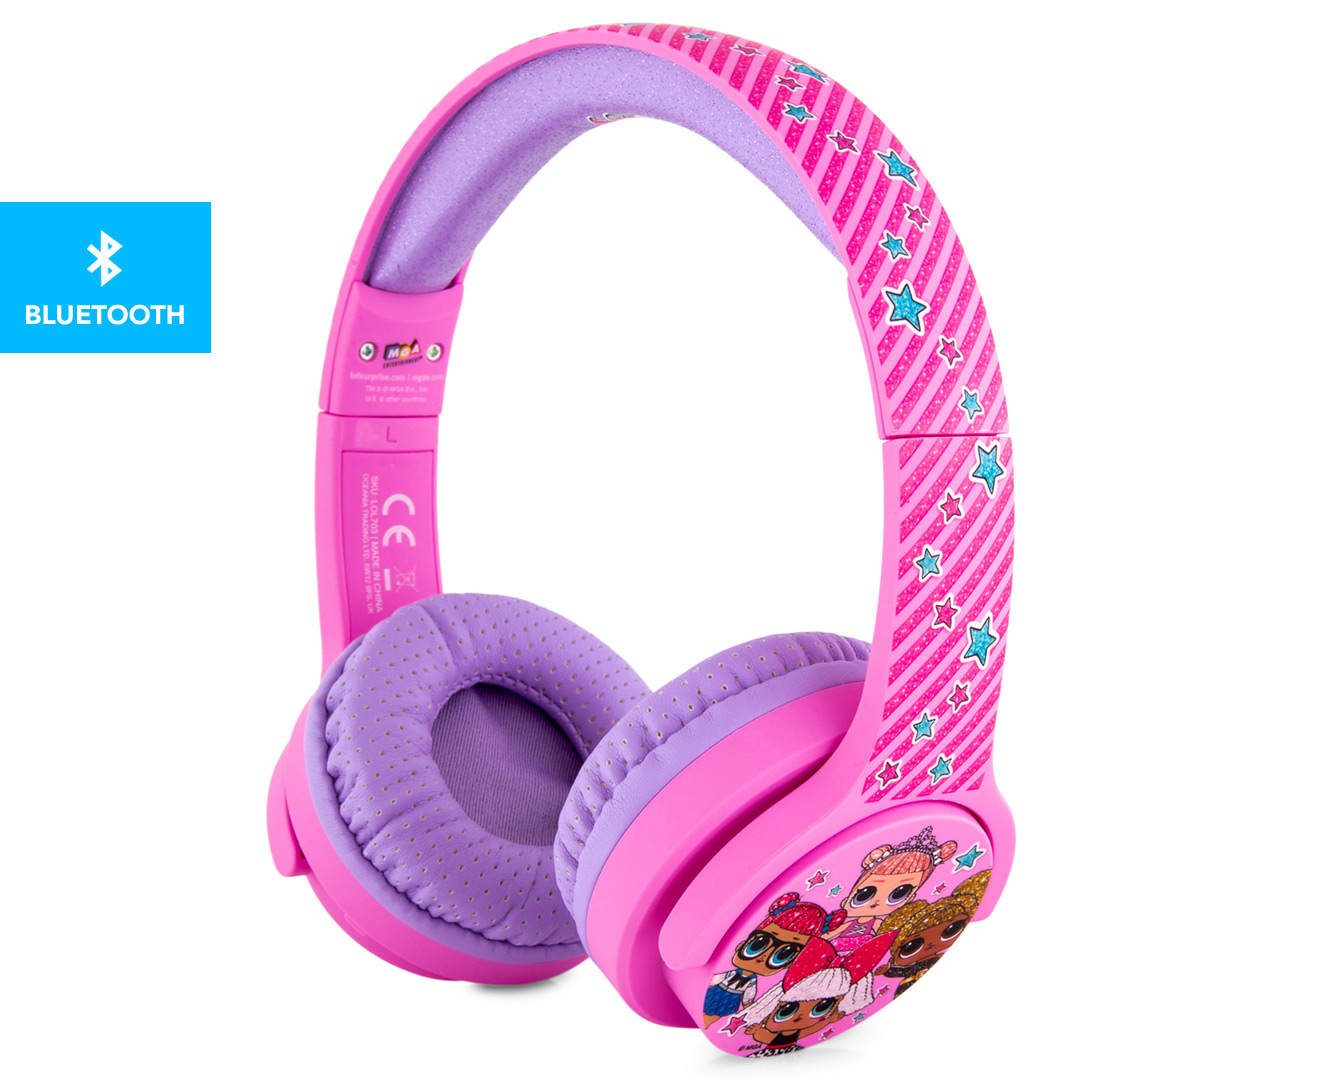 LOL639 Wired On-Ear Headphones L.O.L Surprise Pink and White 